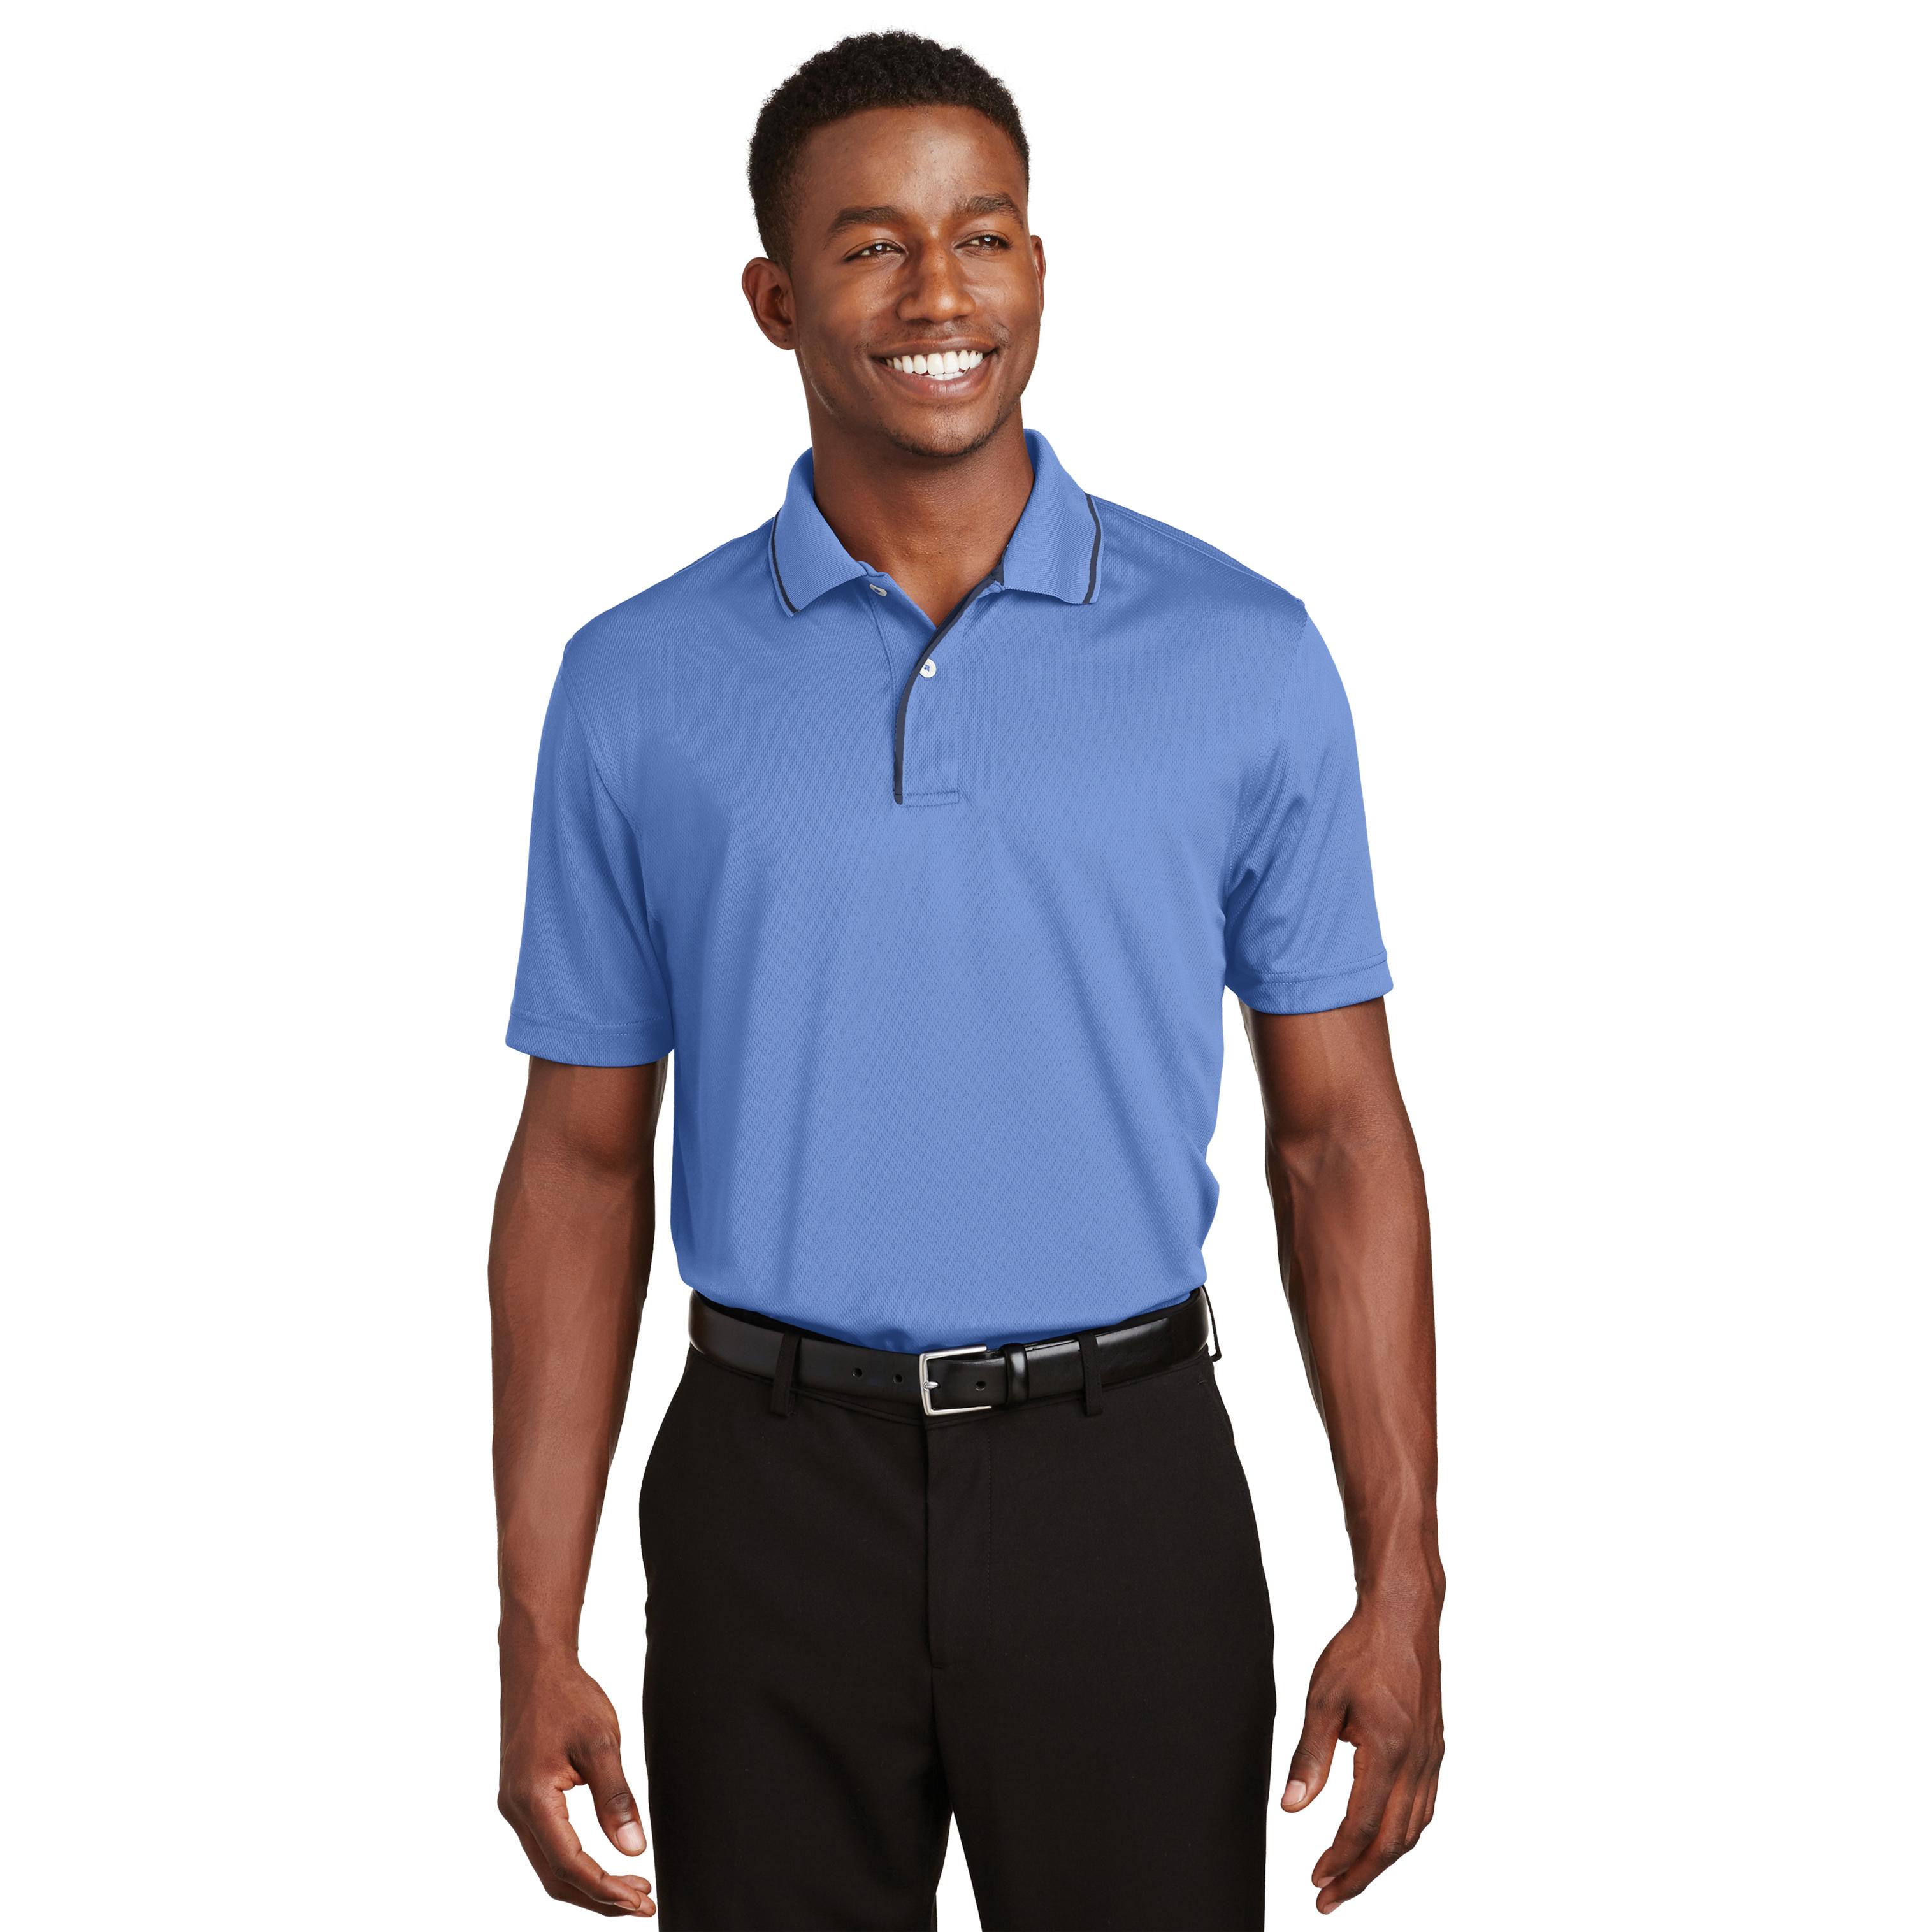 K469 Men's Dri-Mesh® Polo custom embroidered or printed with your logo.